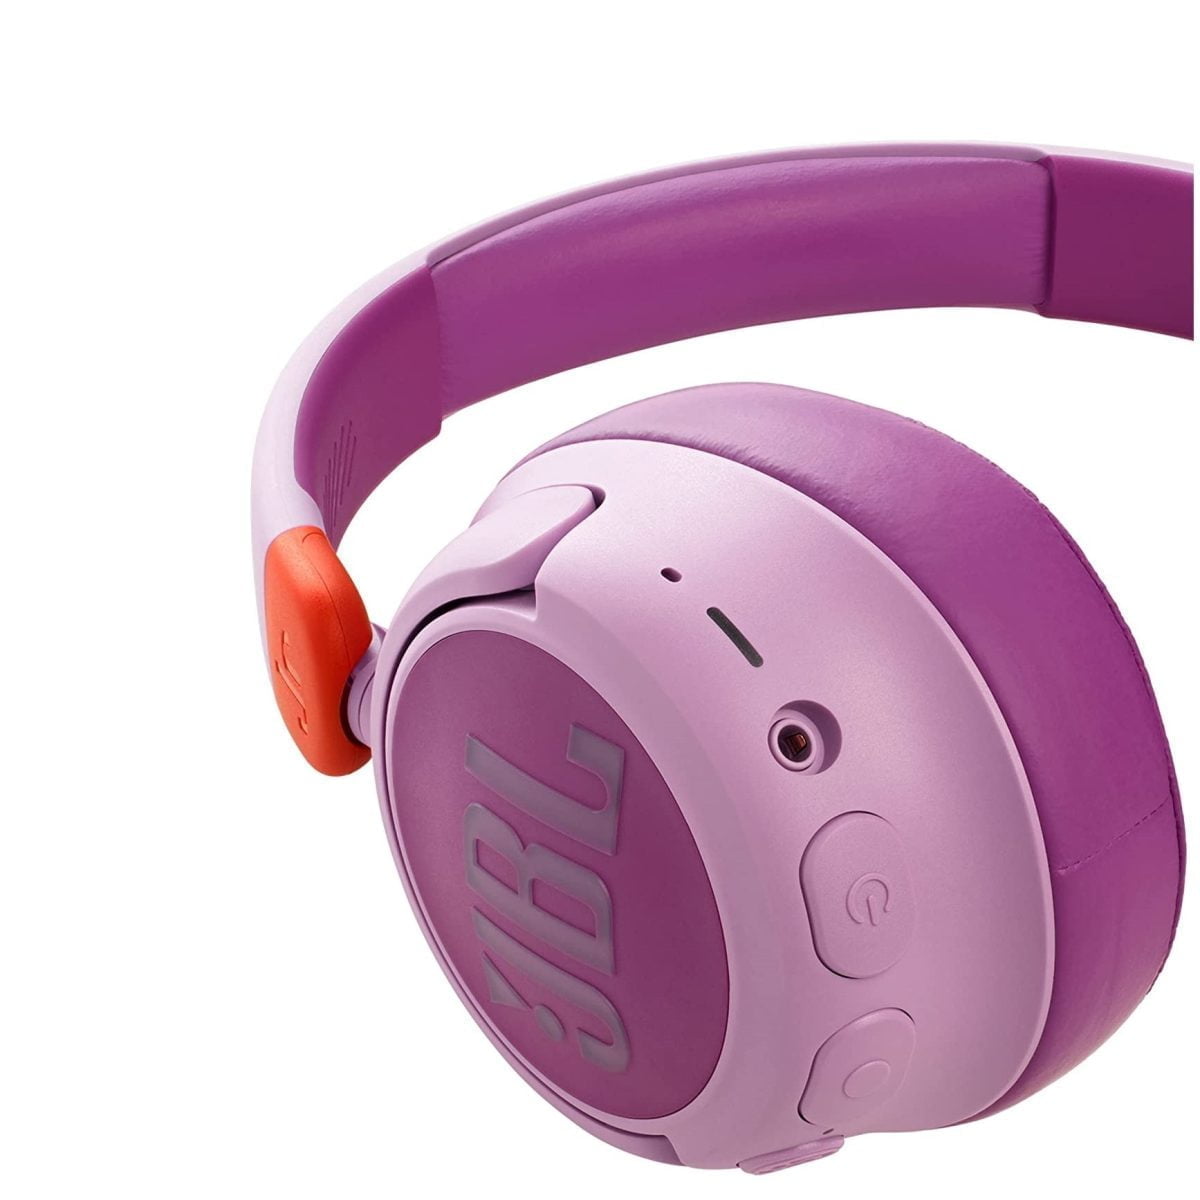 61Rs39Qvyl. Ac Sl1500 Jbl &Lt;H1&Gt;Jbl Jr460Nc On-Ear Wireless Headphones For Kids, Pink&Lt;/H1&Gt;&Lt;Div Class=&Quot;Wpview Wpview-Wrap&Quot; Data-Wpview-Text=&Quot;Https%3A%2F%2Fwww.youtube.com%2Fwatch%3Fv%3Dmdaicwkv4Pg&Quot; Data-Wpview-Type=&Quot;Embedurl&Quot;&Gt;&Lt;Span Class=&Quot;Mce-Shim&Quot;&Gt;&Lt;/Span&Gt;&Lt;Span Class=&Quot;Wpview-End&Quot;&Gt;&Lt;/Span&Gt;&Lt;/Div&Gt;&Lt;P&Gt;Quality Sound Has No Age, But You Want To Be Sure Your Kids Are Safe While Having Fun. With A Maximum Volume Set Under 85Db, They’re Free To Enjoy Jbl Quality Sound, Safely. Shut Out All That Noise And Distraction With Active Noise Cancelling. Your Kids Can Stay Focused Whether They’re Listening To Music, Enjoying Their Favorite Show Or Learning Online. Help Your Kids Stay Connected To The World With The Built-In Mic. They Can Chat Easily With Friends And Family During Downtime, Or Teachers While They’re Busy Learning.&Lt;/P&Gt; Jbl Headphone Jbl Jr460Nc Wireless Over-Ear Noise Cancelling Kids Headphones - Pink